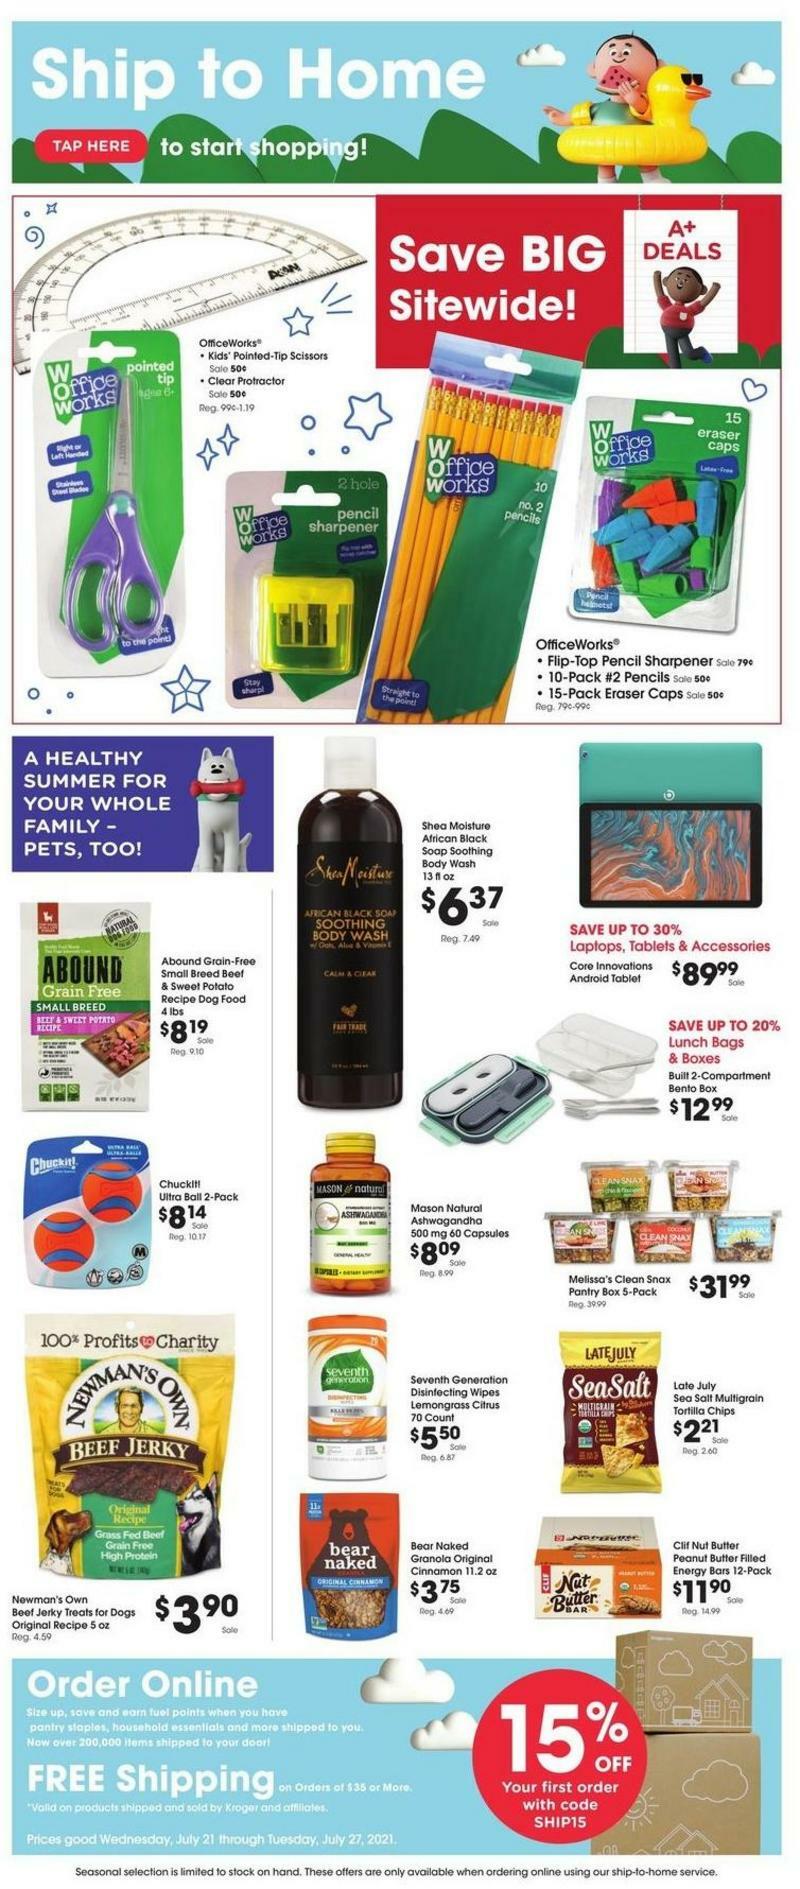 Kroger Ship to Home Weekly Ads & Special Buys from July 21